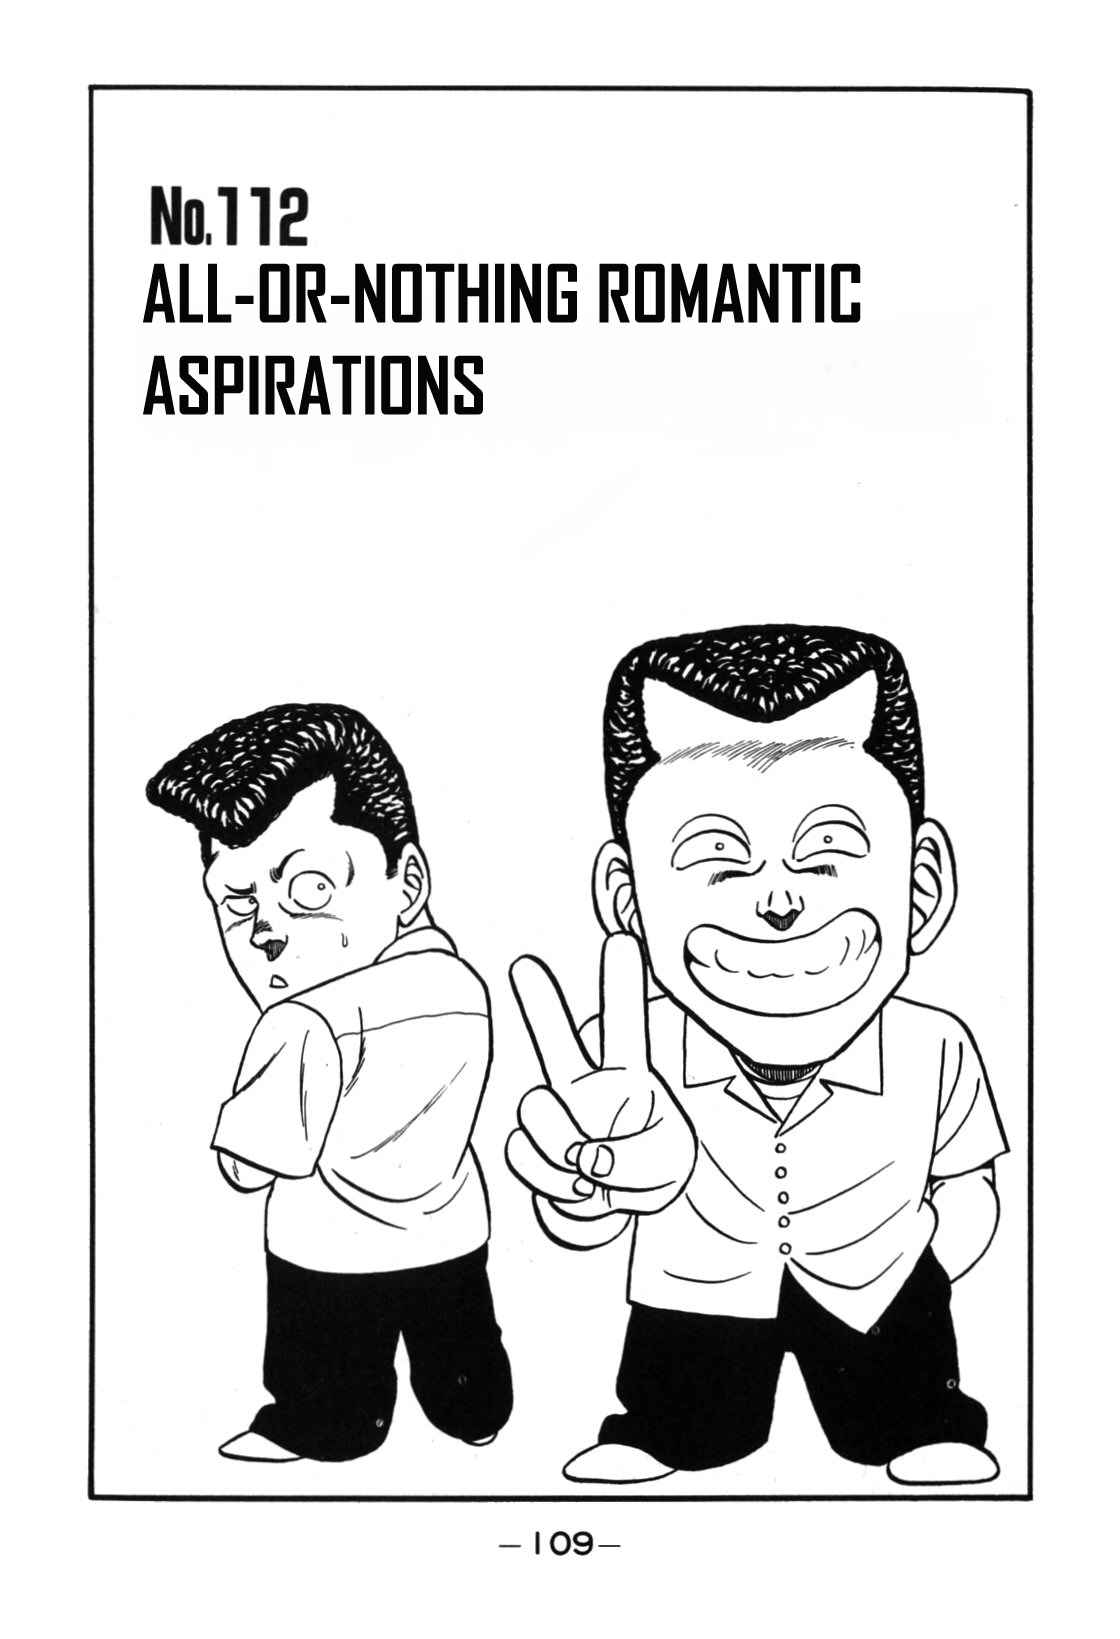 Be Bop High School Vol. 13 Ch. 112 All or Nothing Romantic Aspirations